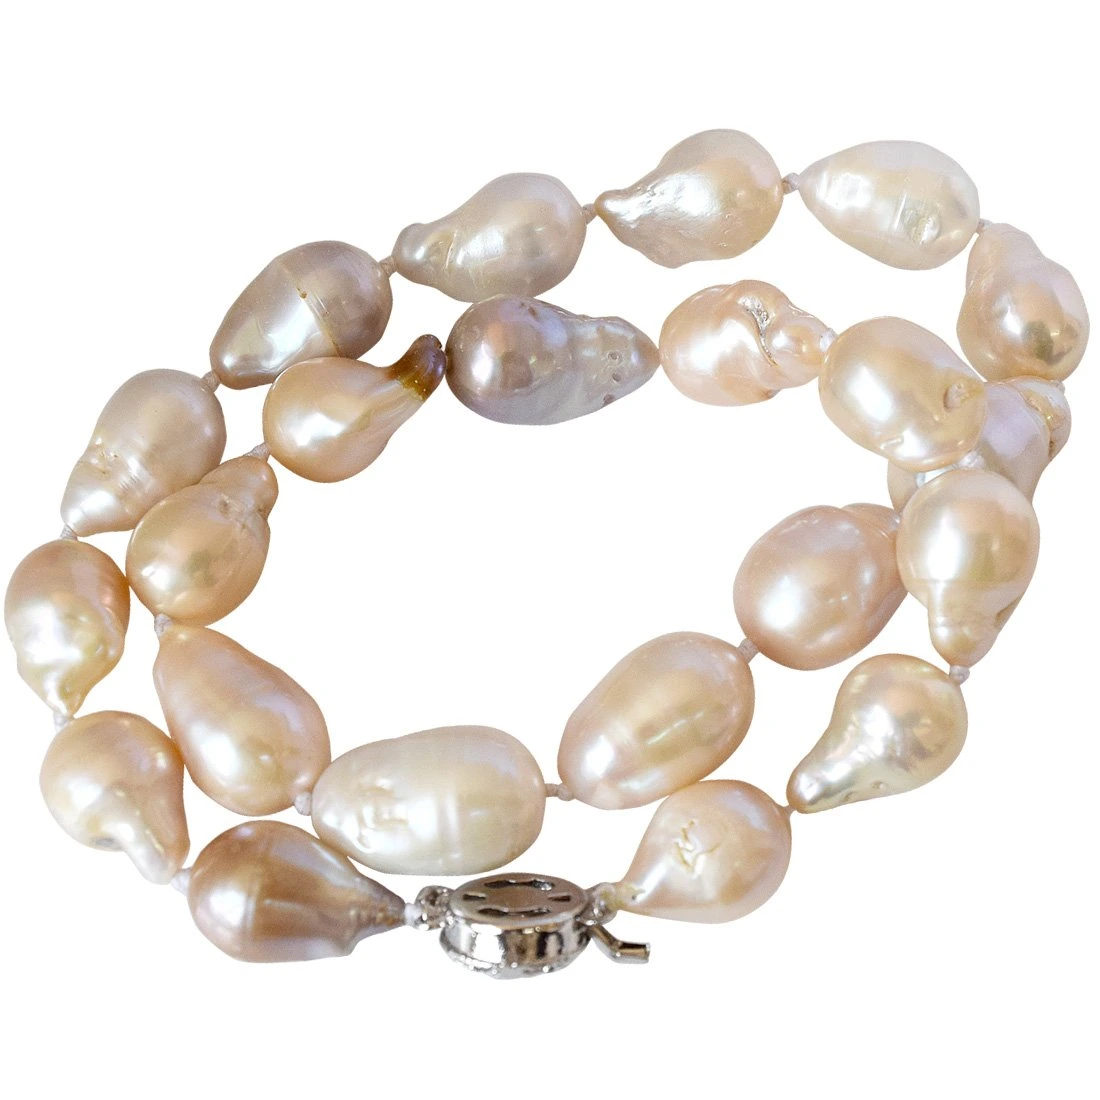 Single Line 418.93cts Peach Real Baroque Pearl Necklace for Women (SN835-418.93cts)